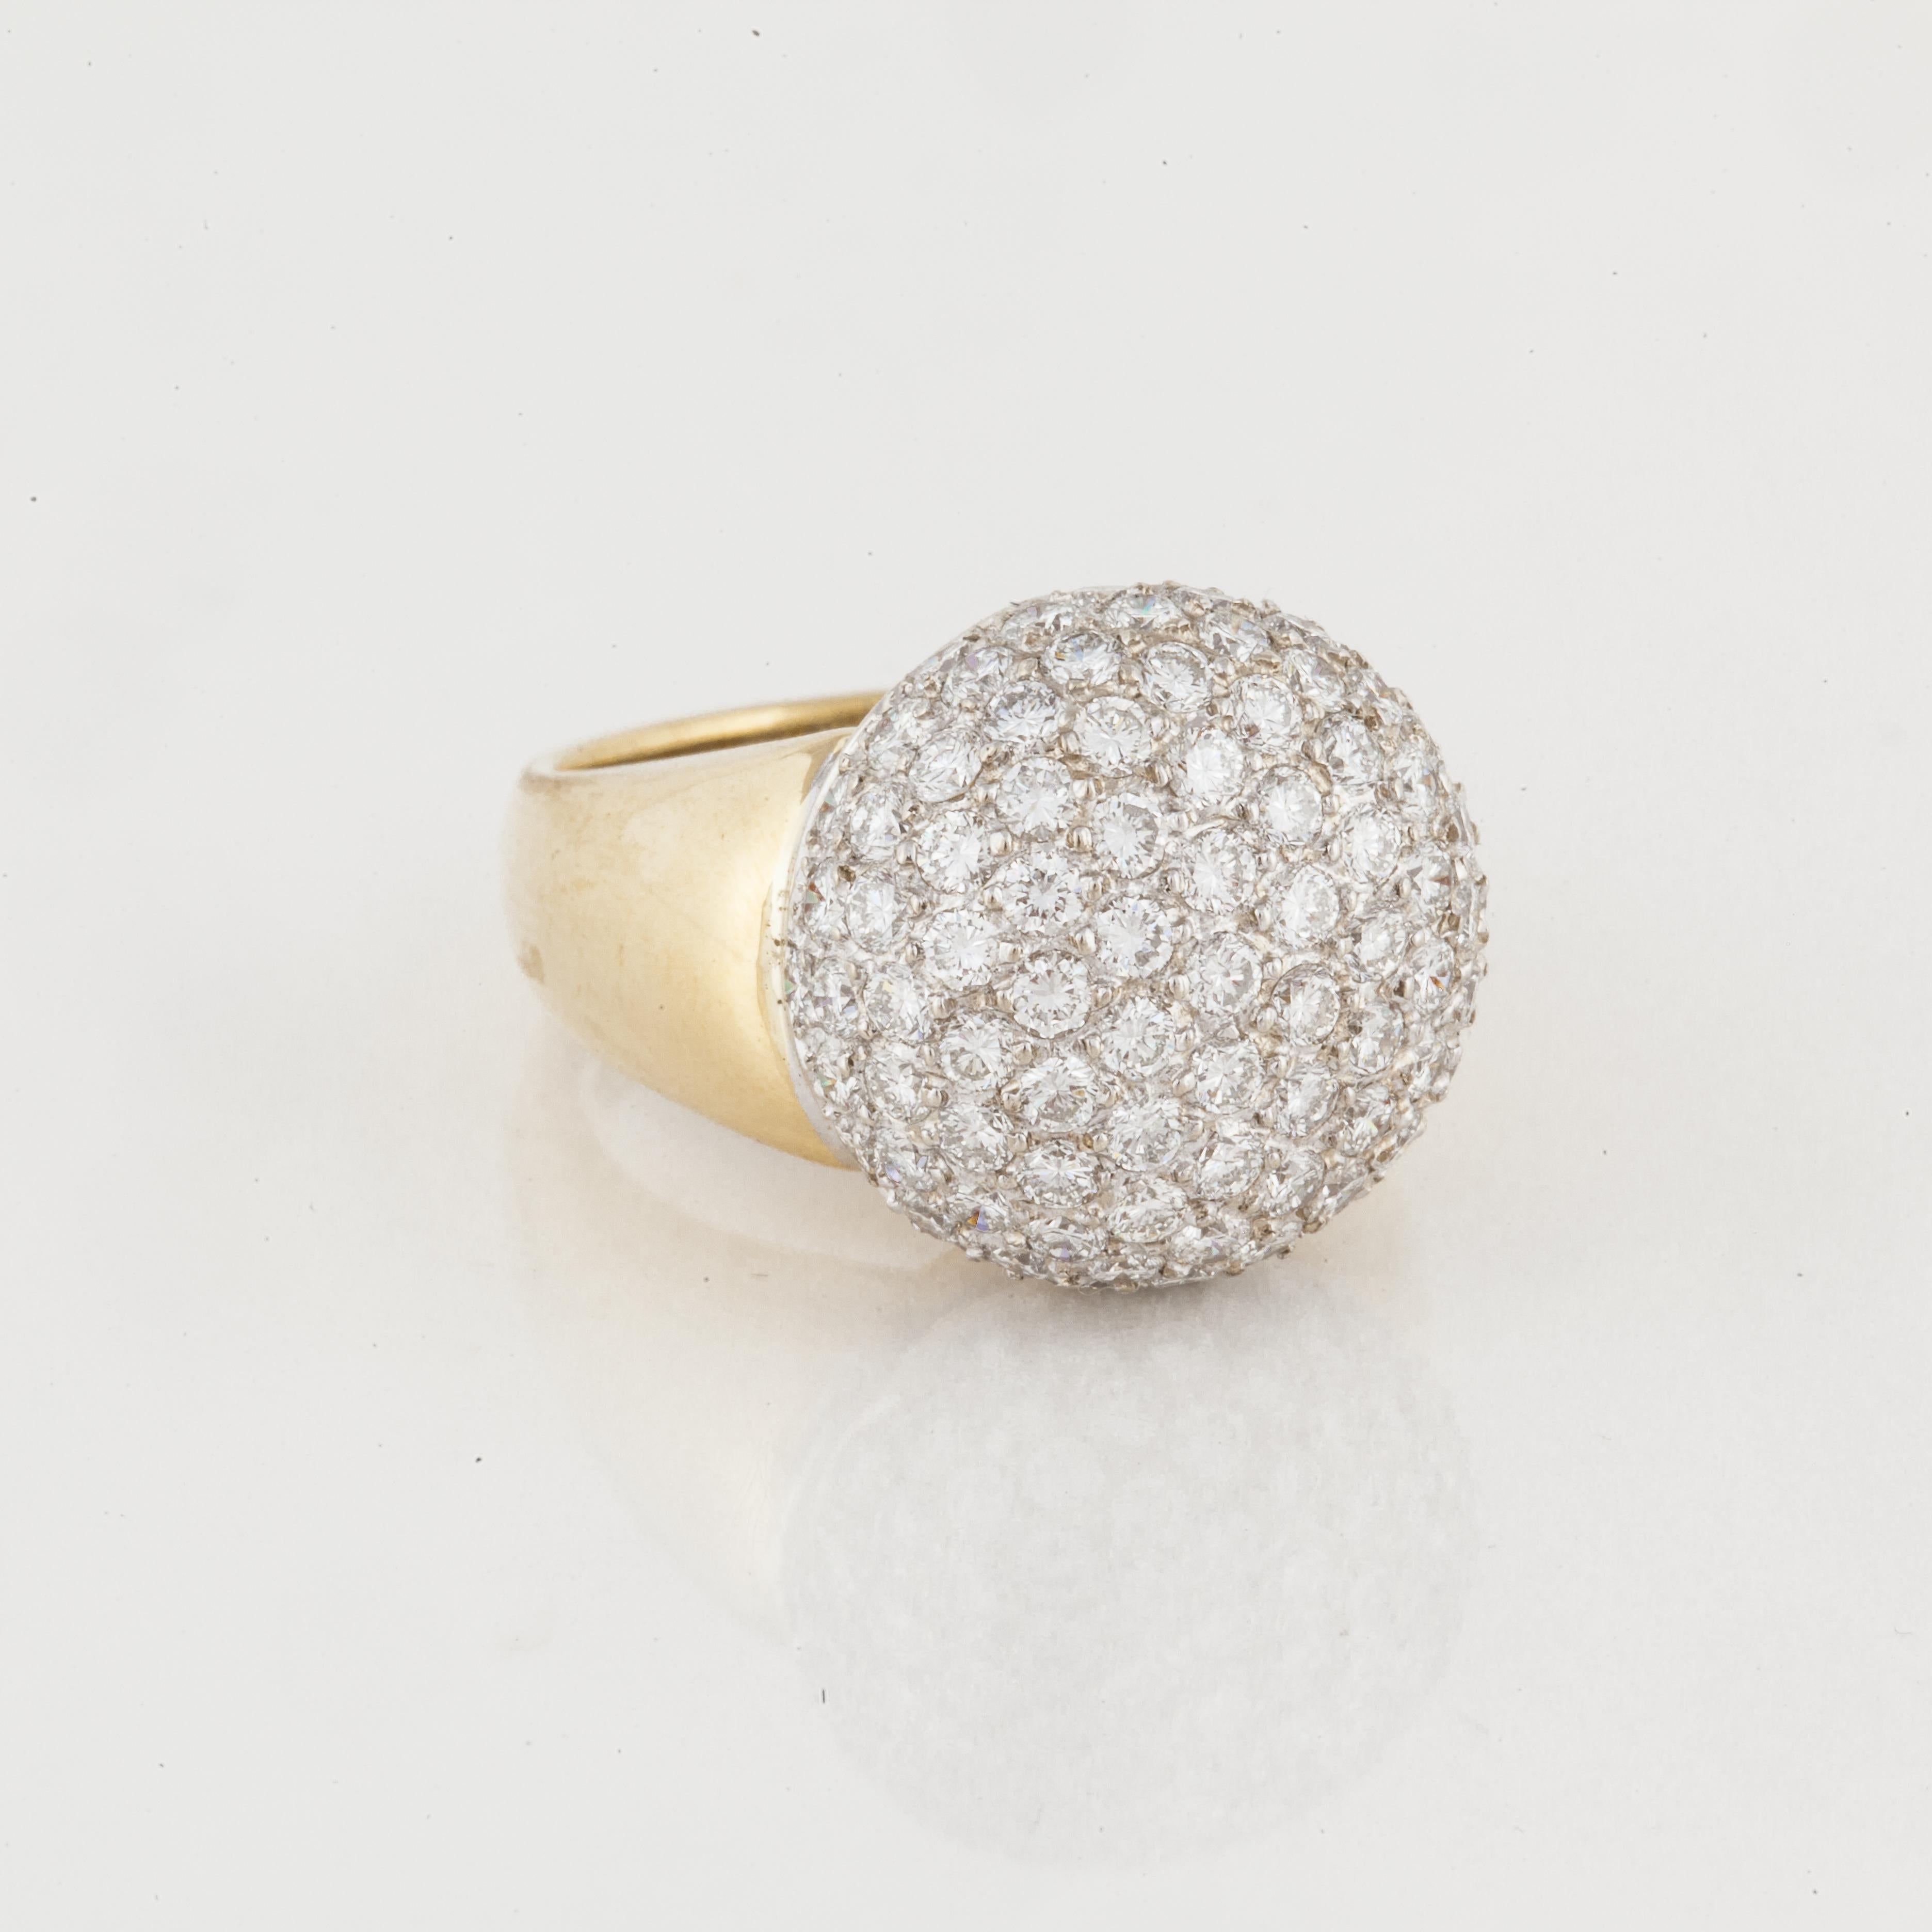 18K yellow gold ring with pavé diamonds set in white gold.  There are 95 round brilliant-cut diamonds that total 4.25 carats; G-H color and VS1-SI1 clarity.  Ring is currently a size 7 1/2 and it is 11/16 inches wide across the top and may be